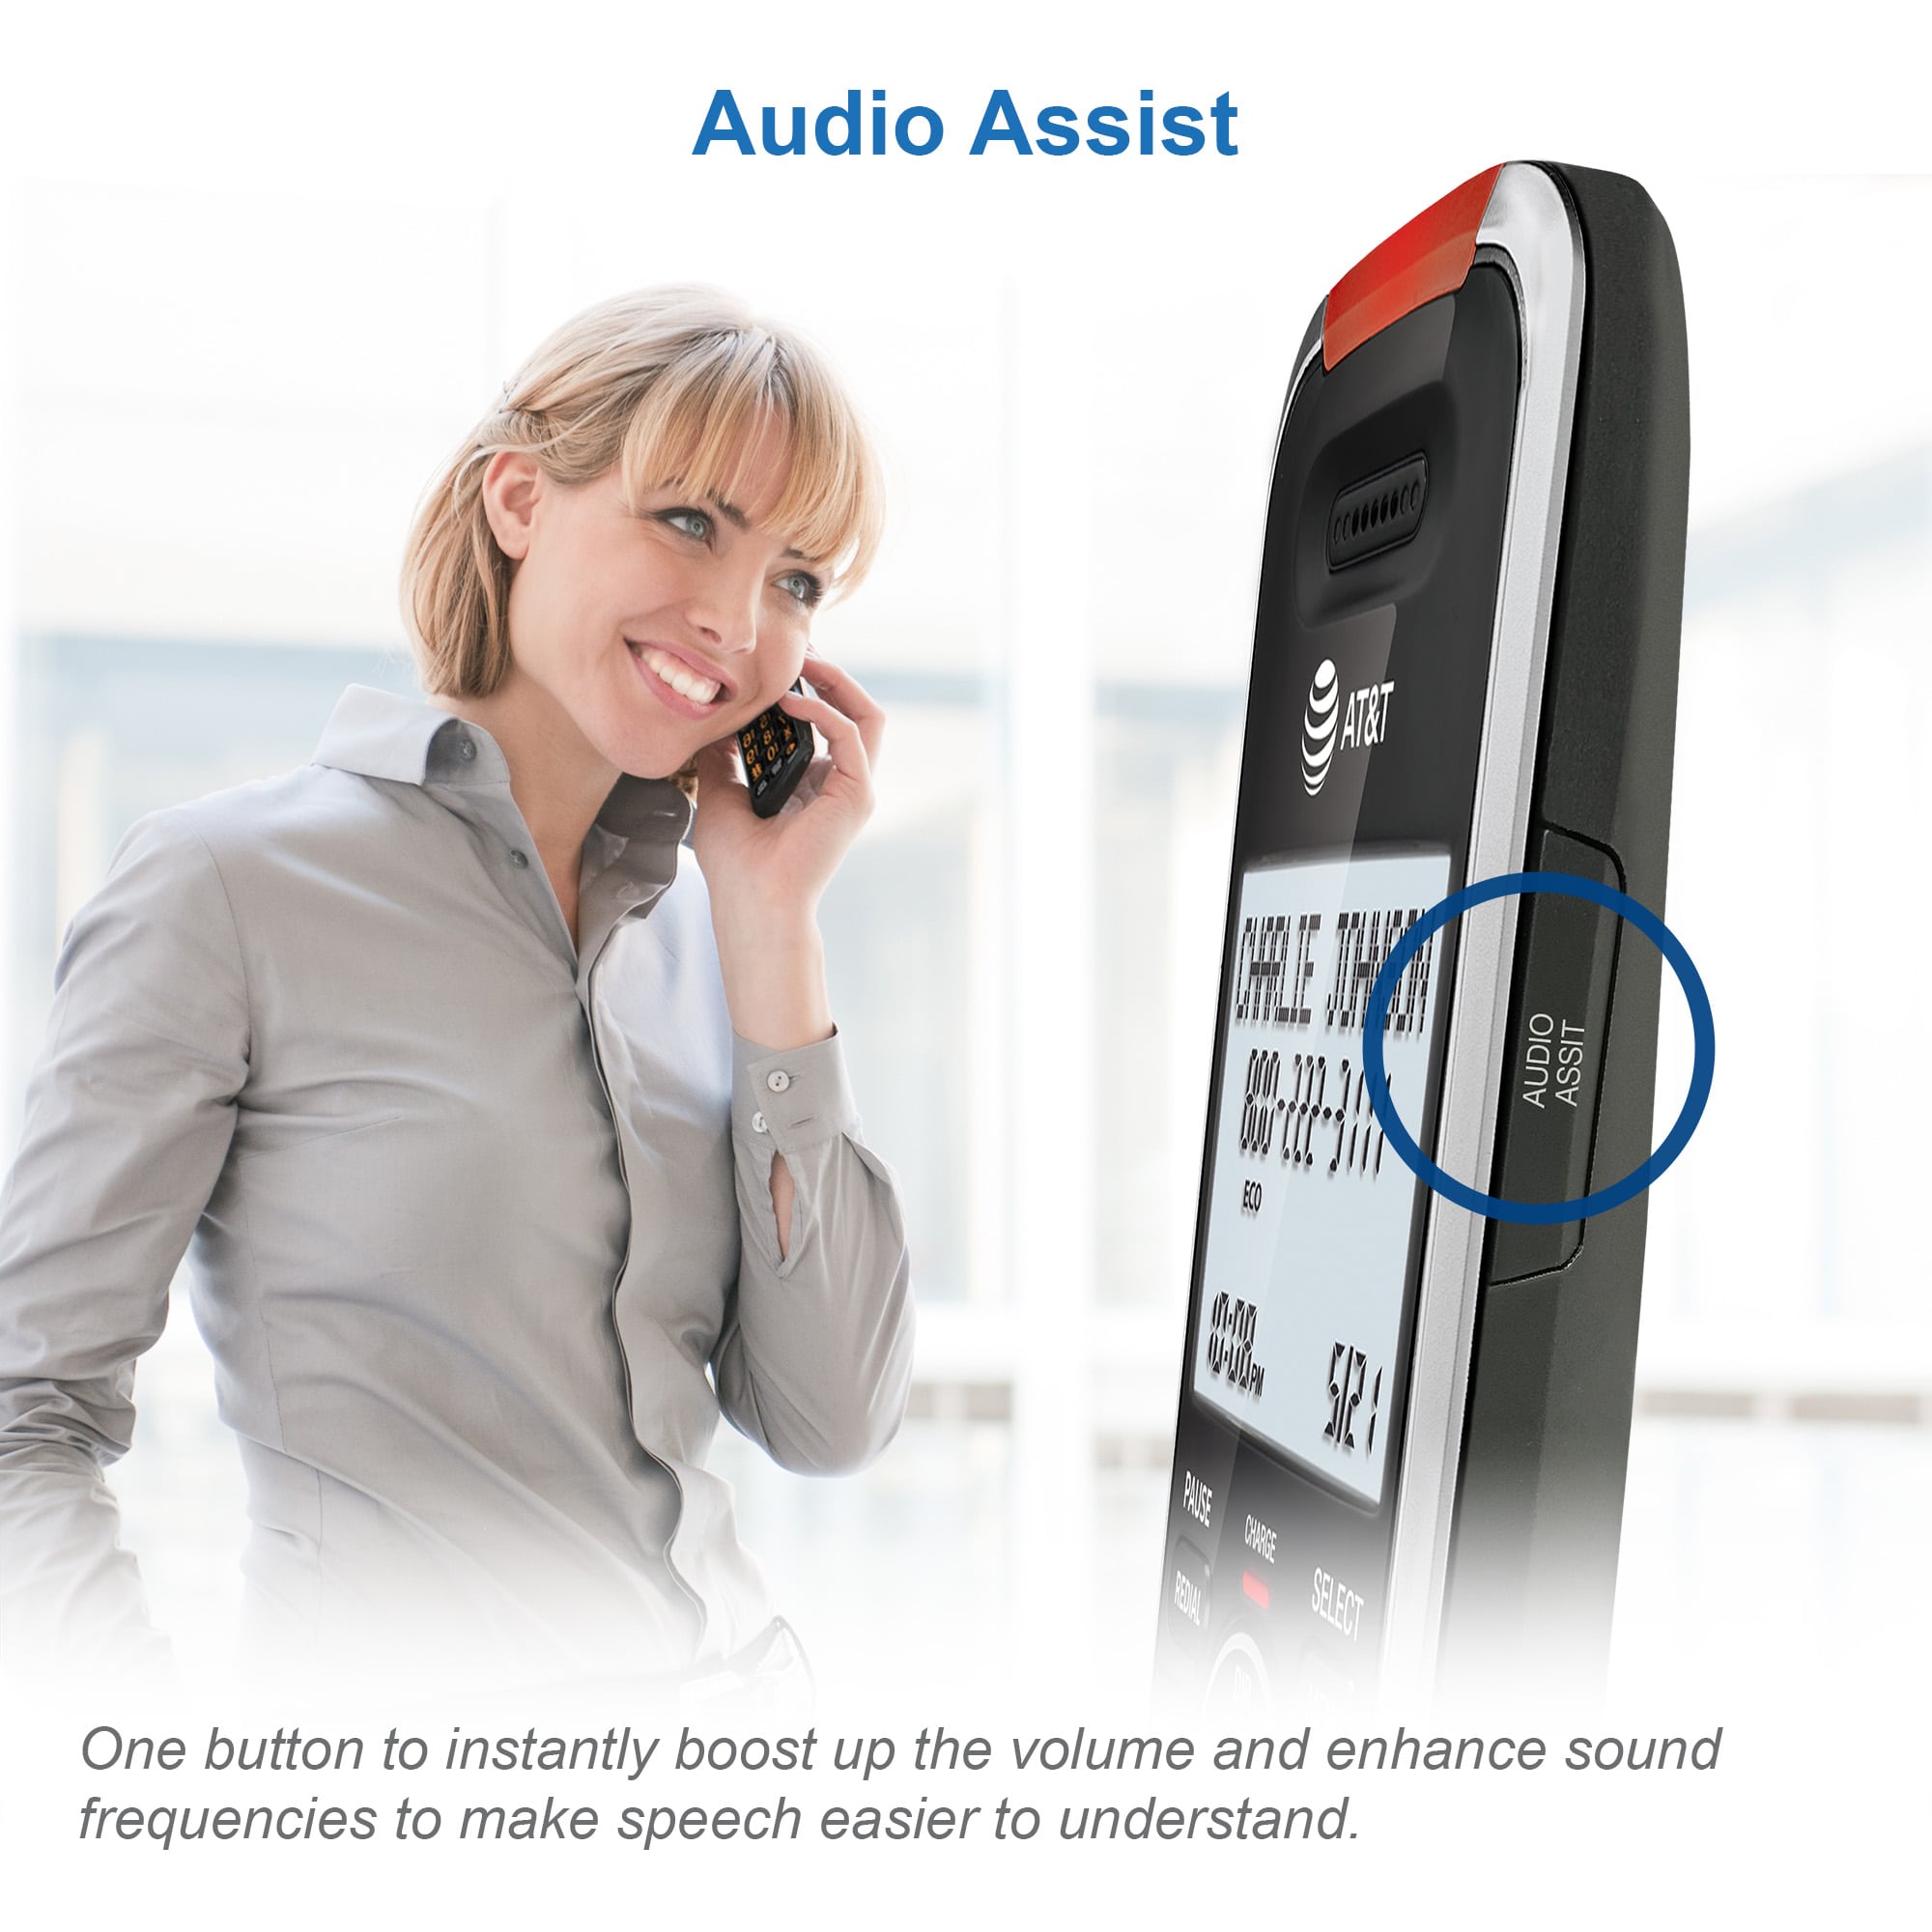 2-Handset Cordless Phone with Unsurpassed Range, Smart Call Blocker and Answering System - view 6